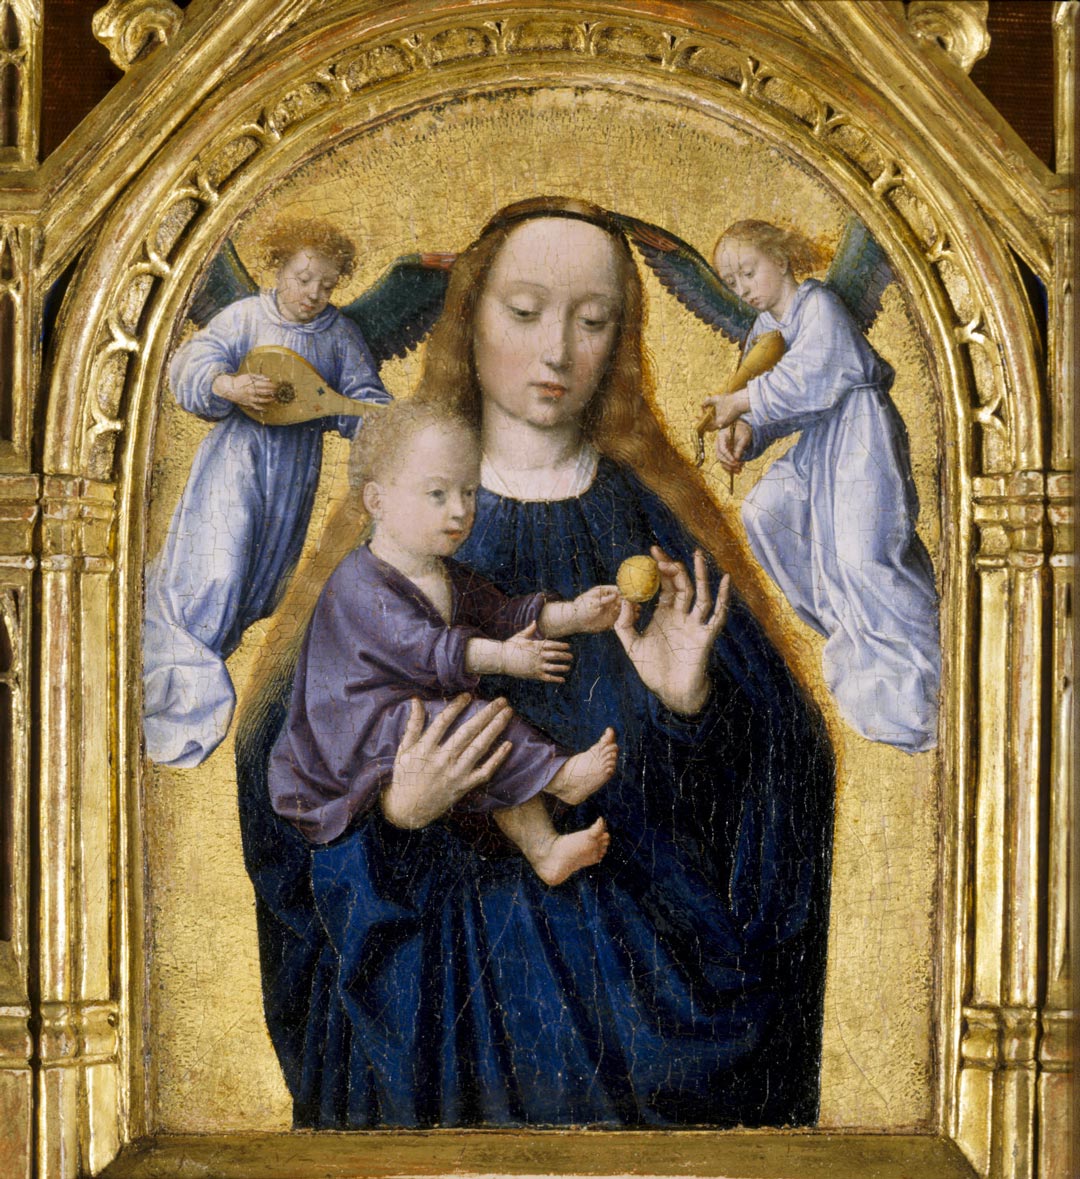 Gerard David - The Madonna and Child with two music making angels c1500. Upton House Warwickshire, UK. © National Trust